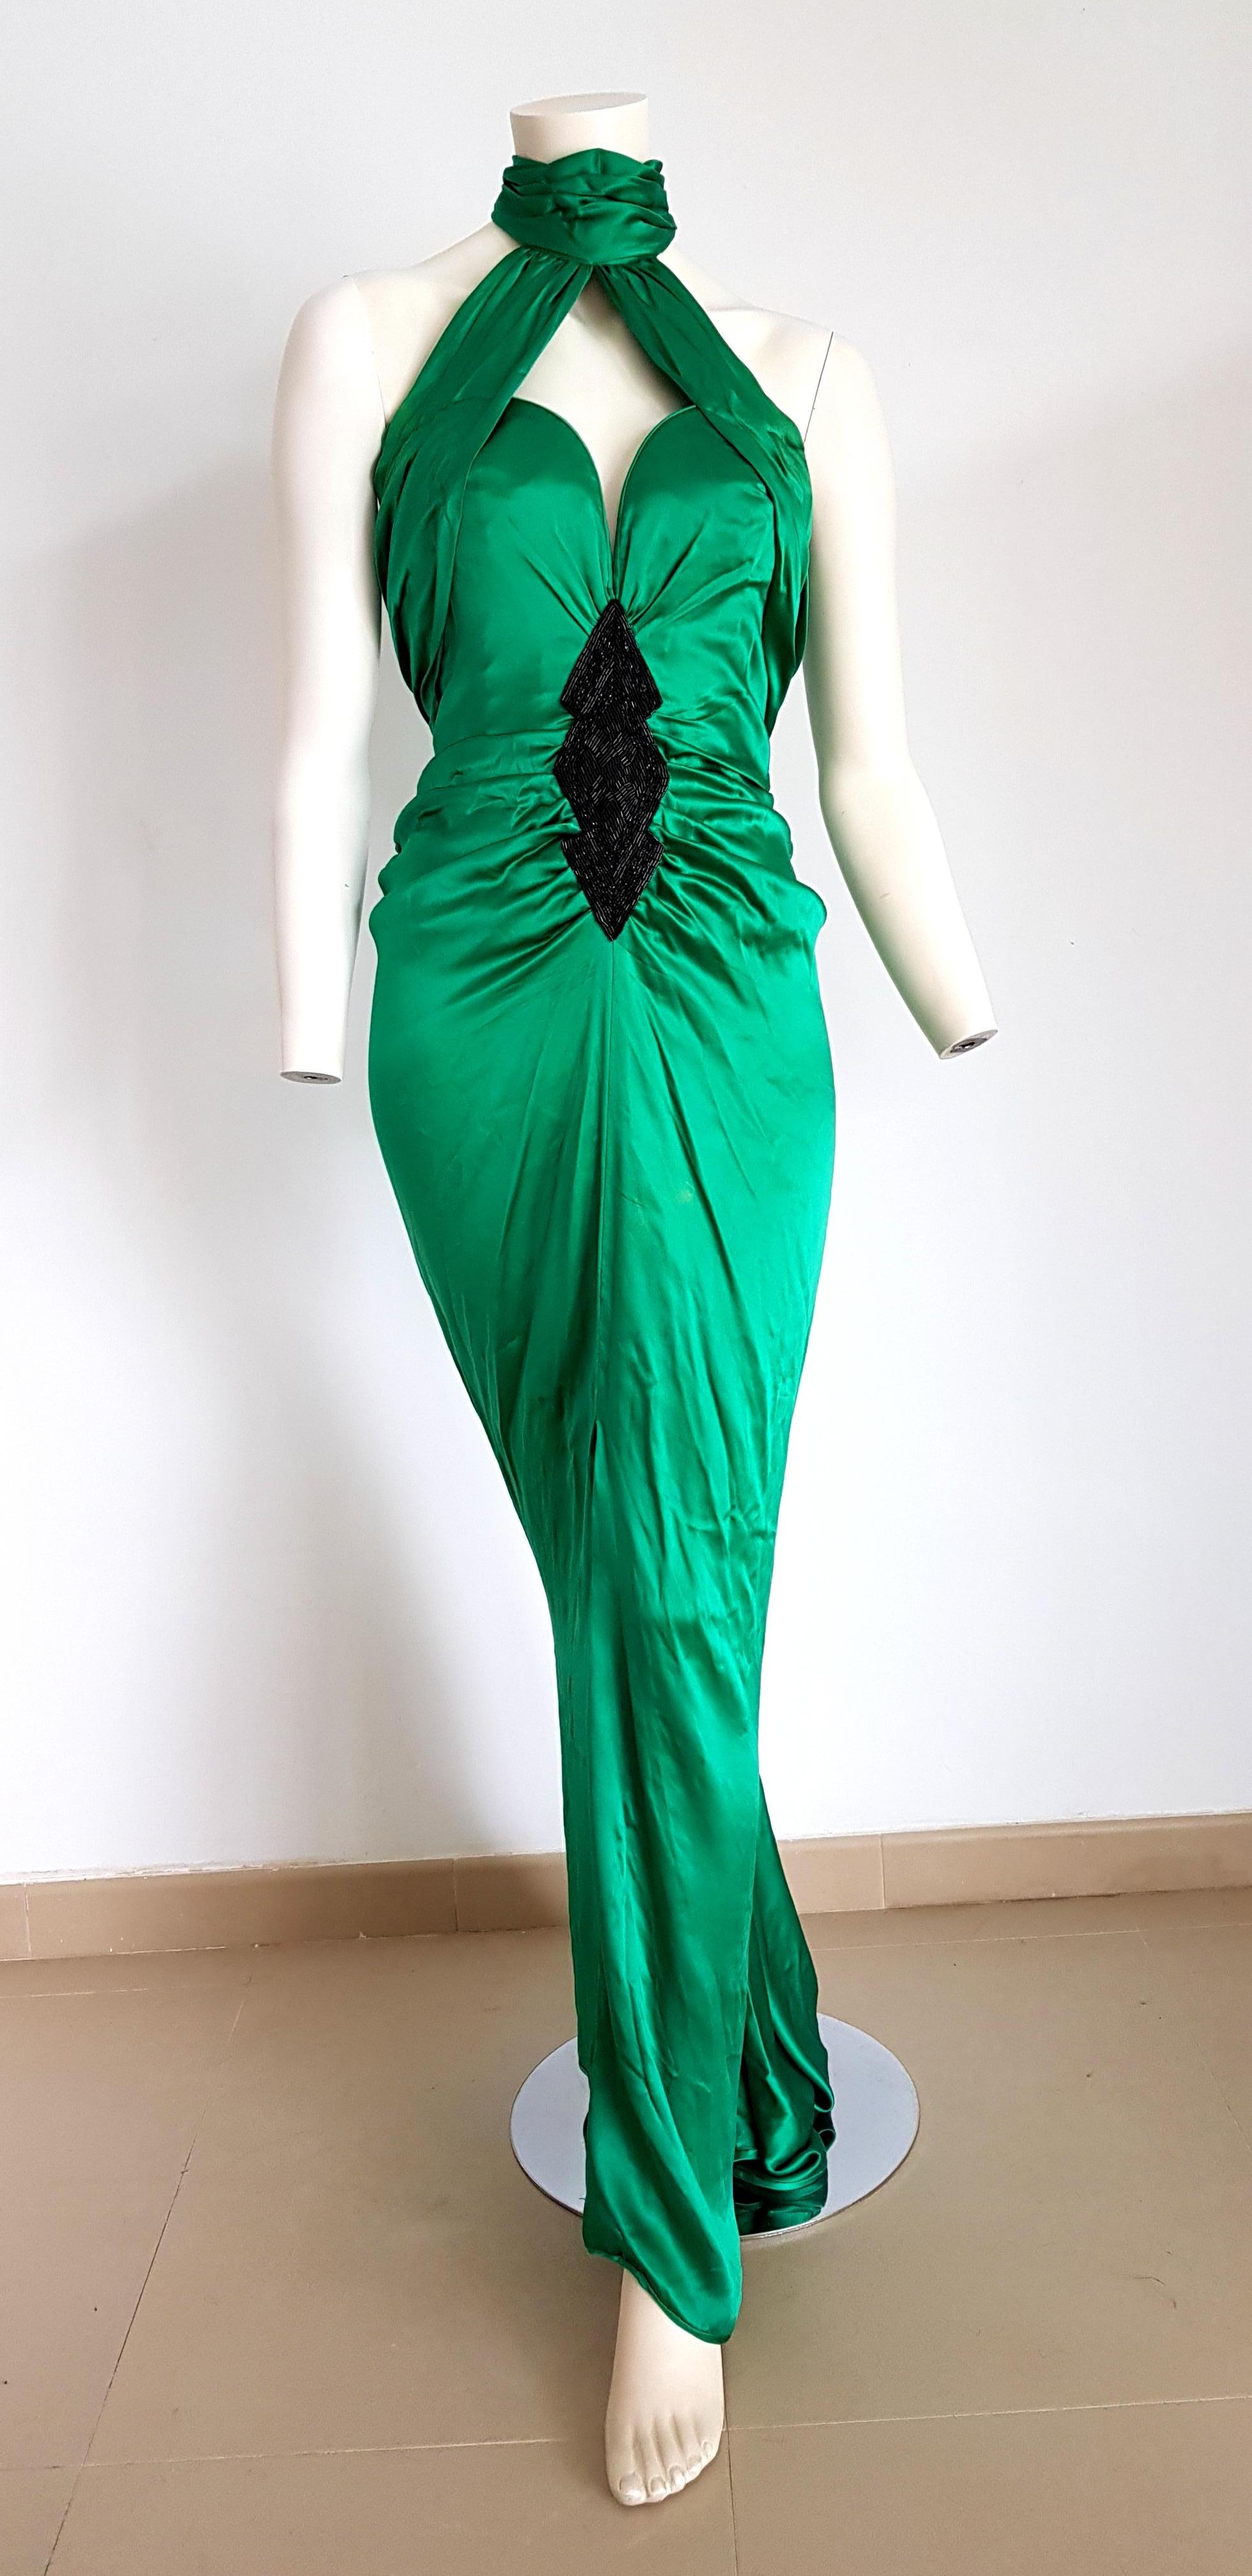 VALENTINO Haute Couture Green, Black Swarovski Beading Design on Waist, Silk Gown Evening Dress - Unworn, New.

SIZE: equivalent to about Small / Medium, please review approx measurements as follows in cm: lenght 152, chest underarm to underarm 50,